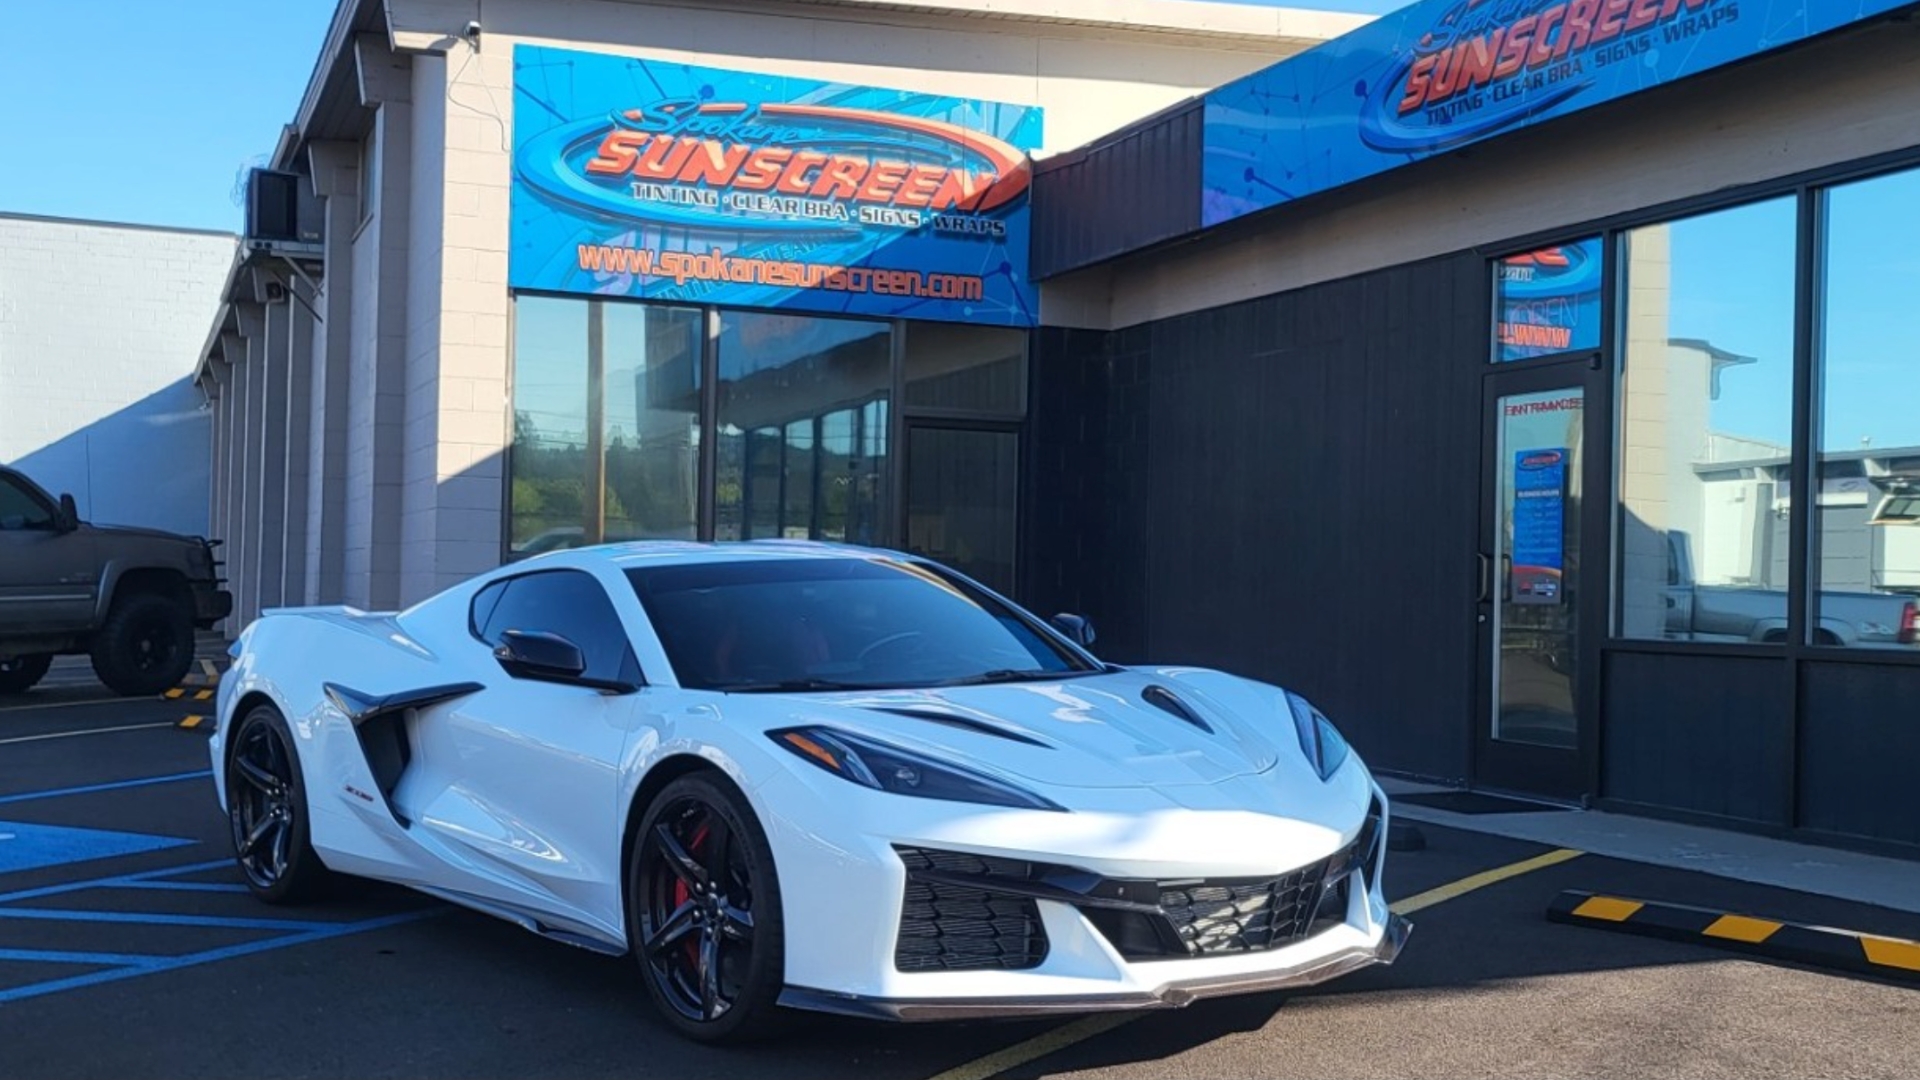 A sleek white Chevrolet Corvette parked in front of Spokane Sunscreen signage, with blue sky reflecting on the car's shiny surface.